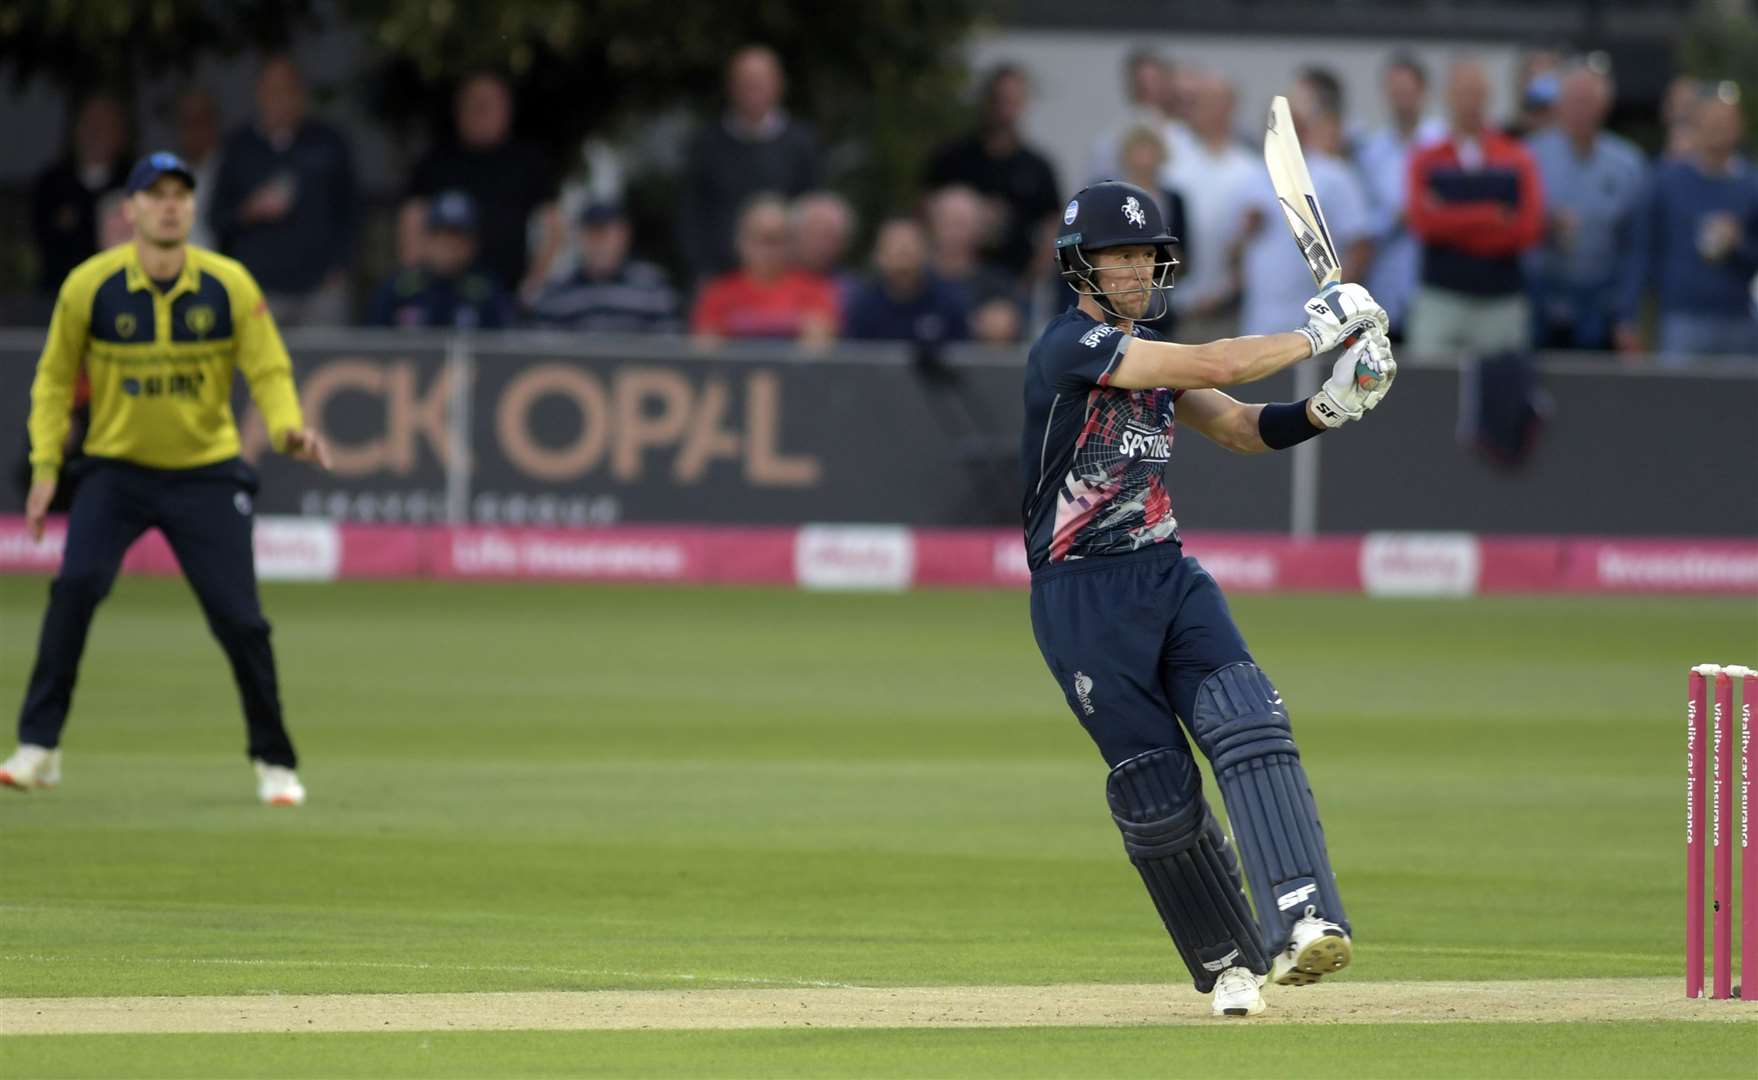 Joe Denly scored 11 and took 1-20 with the ball for Kent against Birmingham. Picture: Barry Goodwin (50663576)